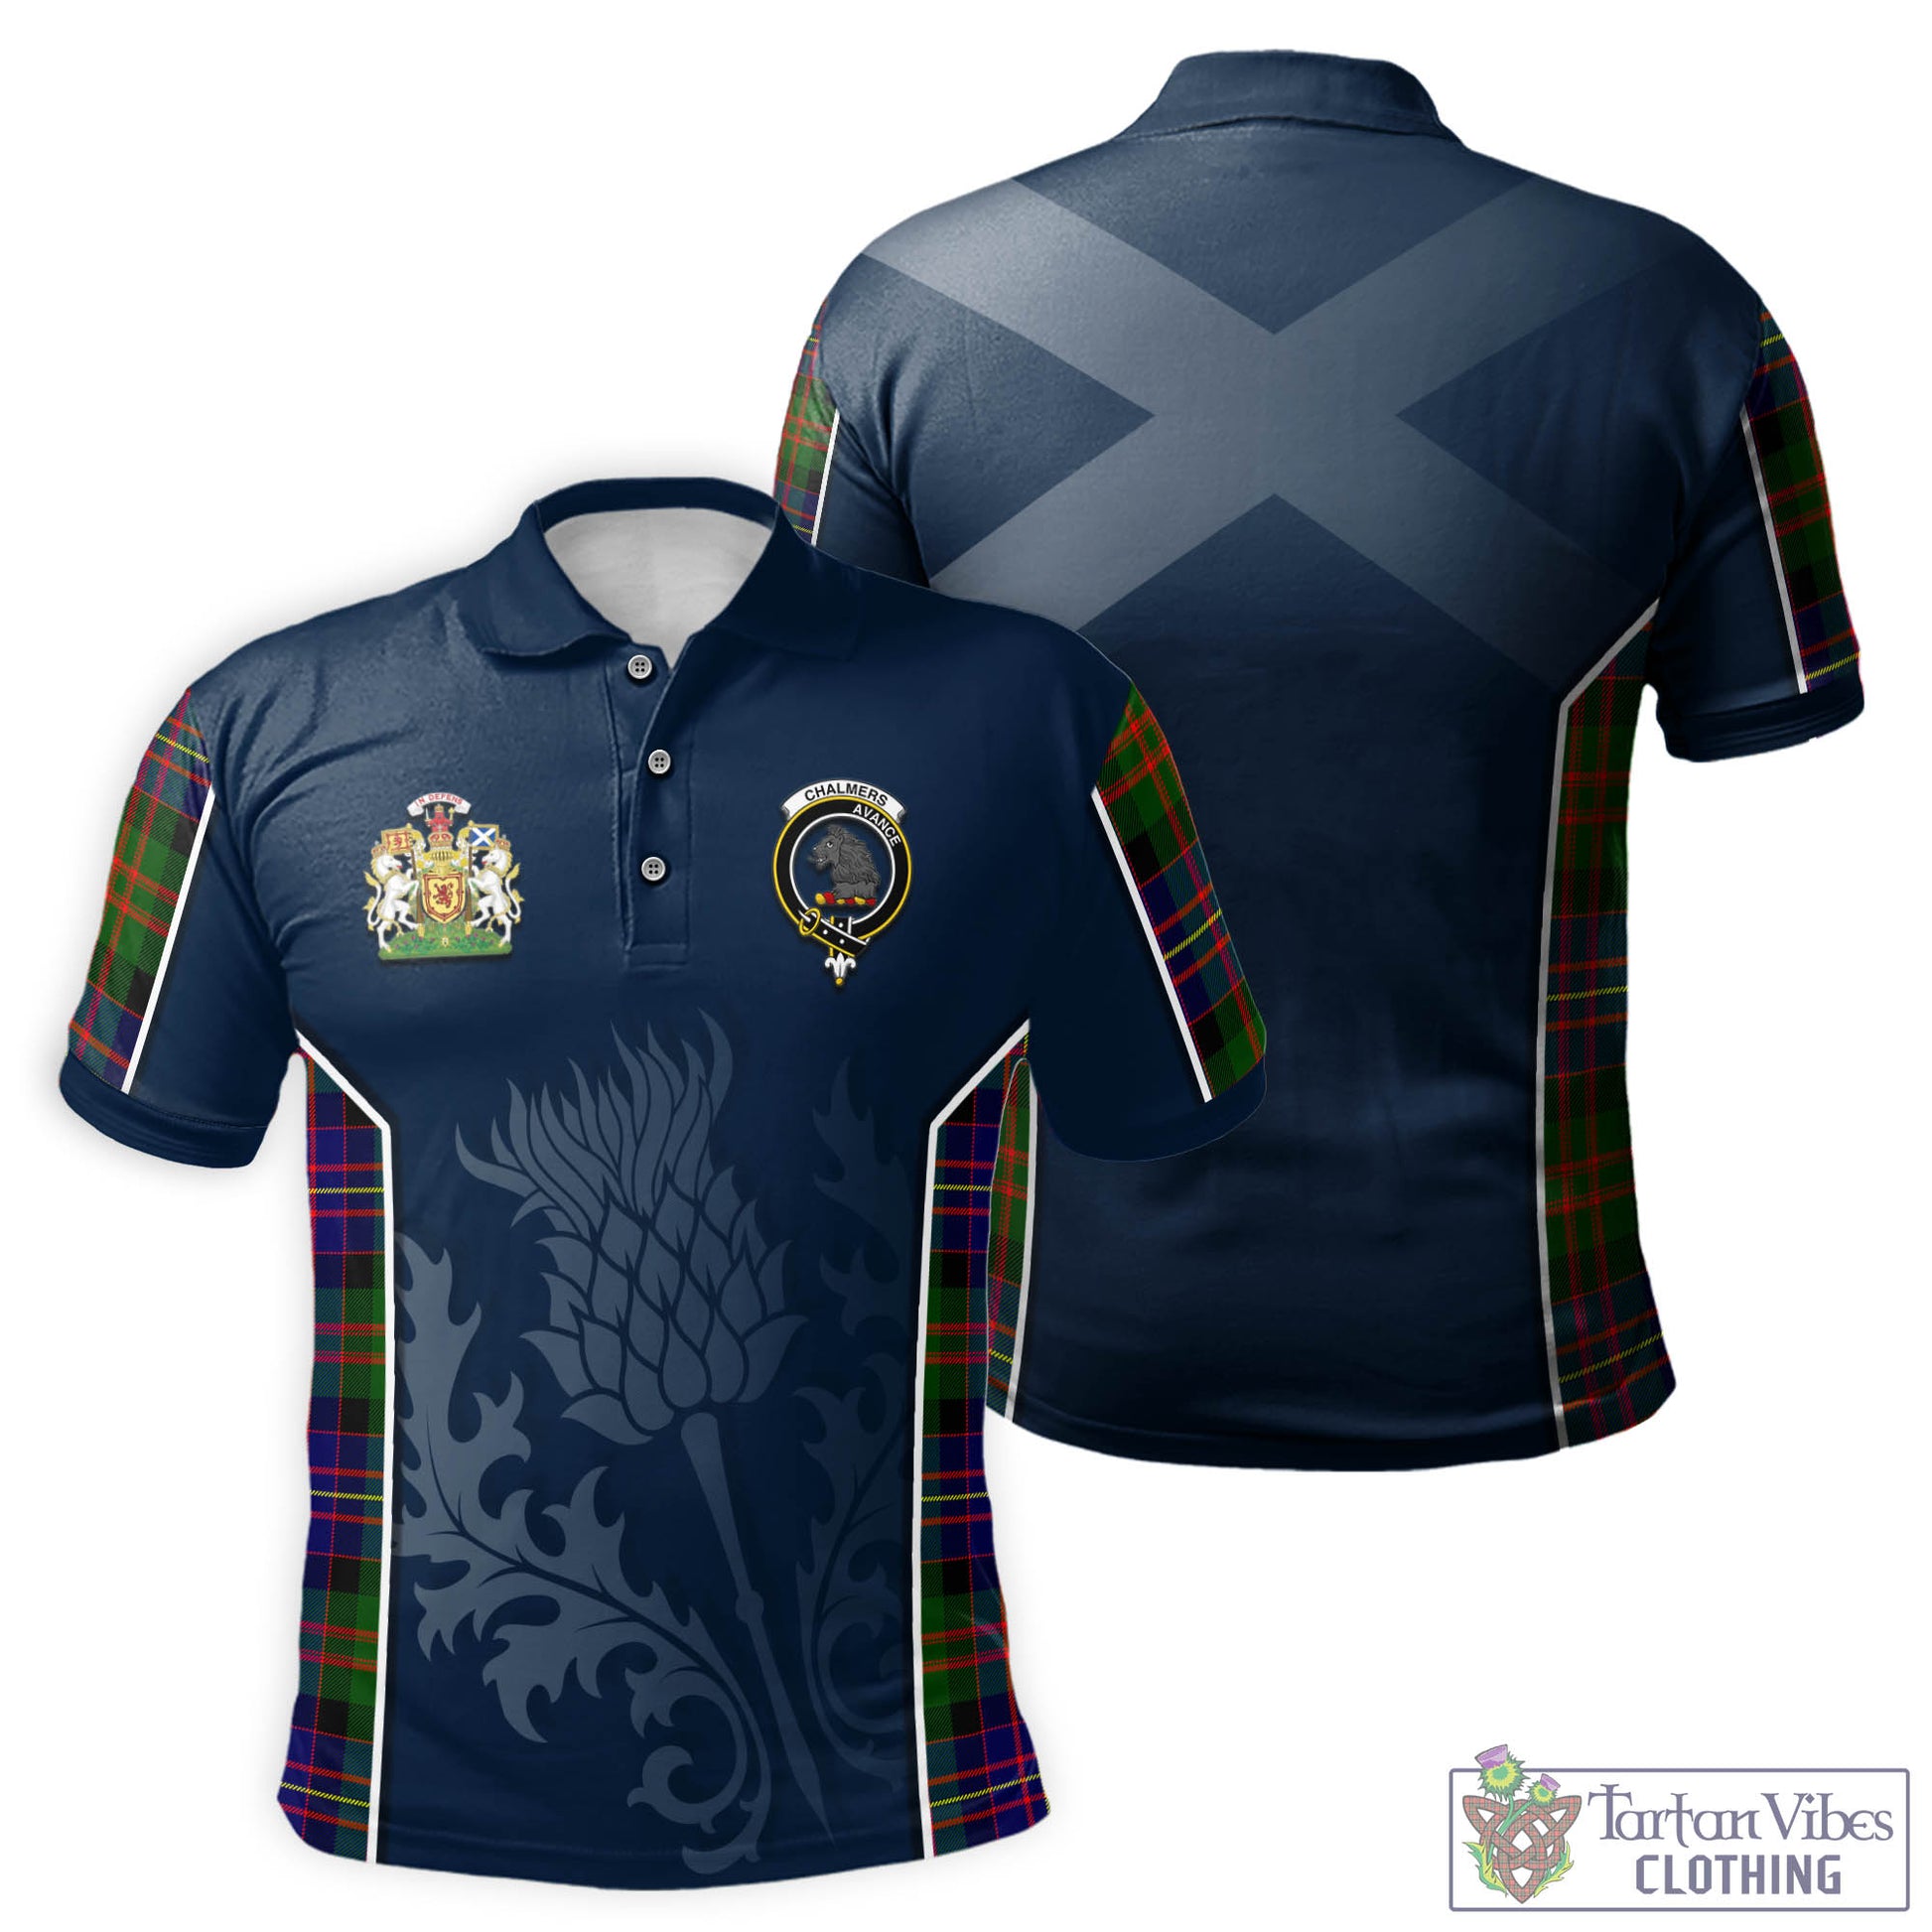 Tartan Vibes Clothing Chalmers Modern Tartan Men's Polo Shirt with Family Crest and Scottish Thistle Vibes Sport Style